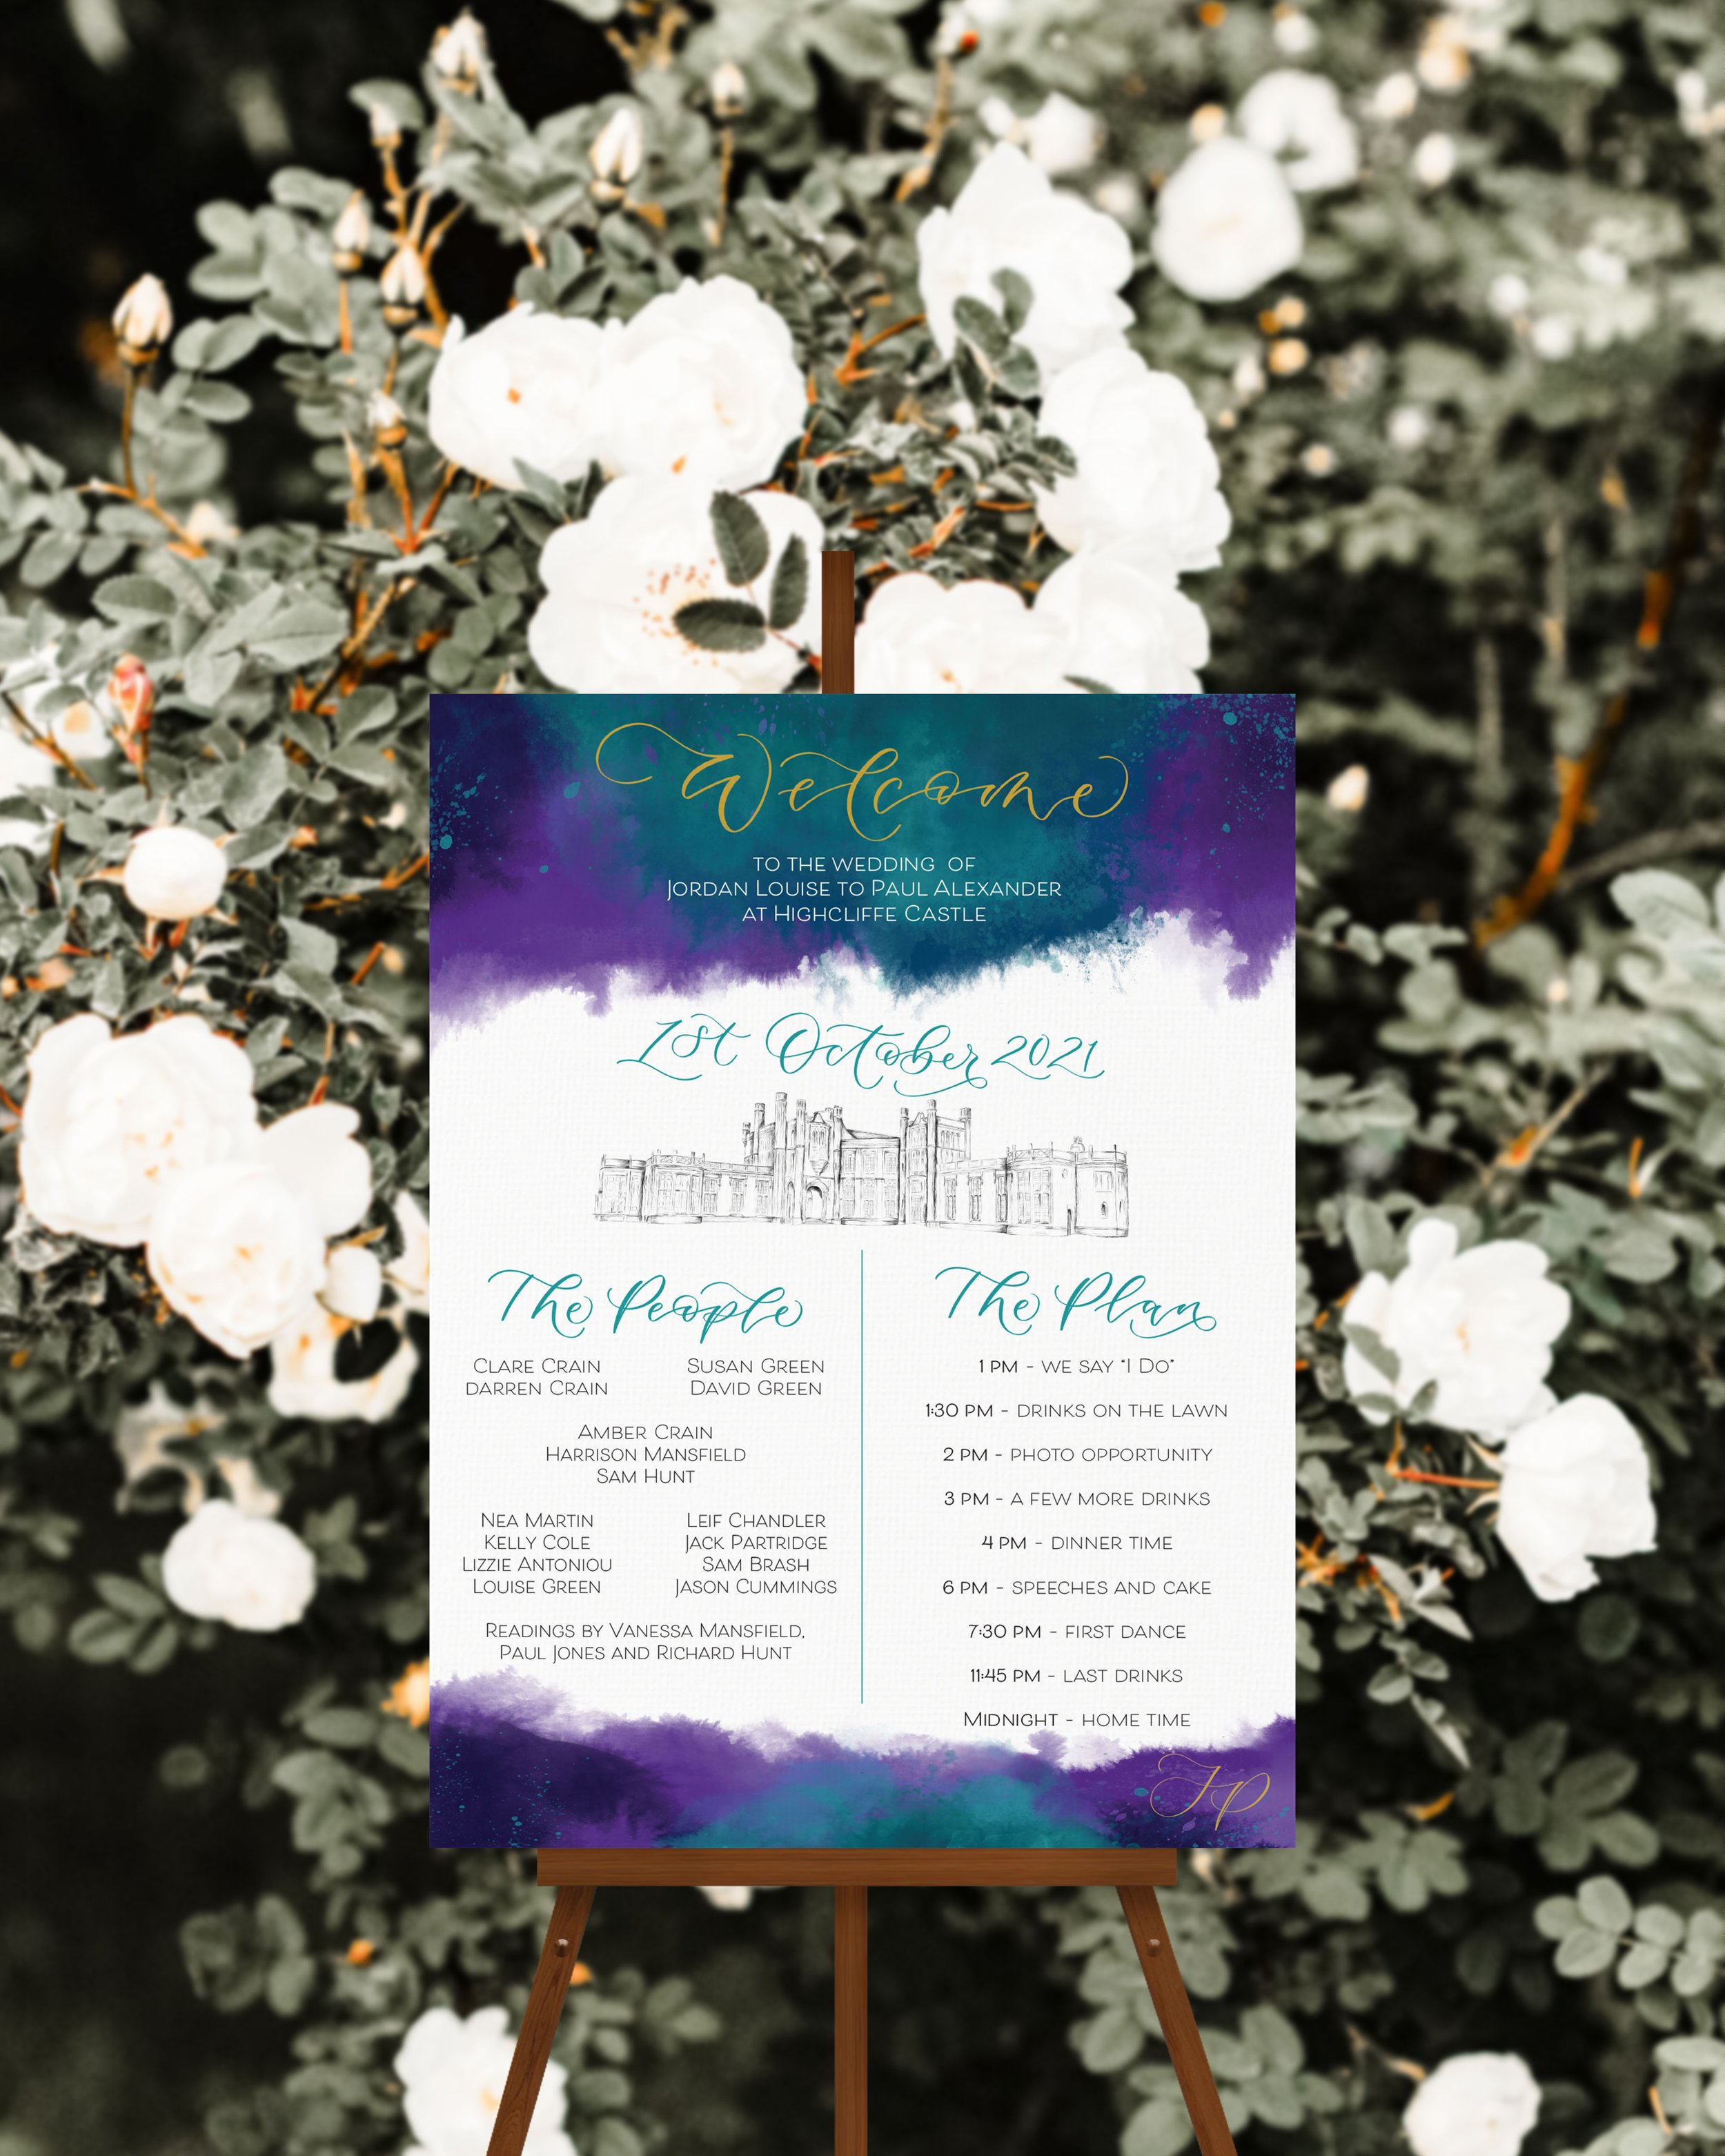 Highcliffe Hotel wedding sign - wedding welcome sign - colourful watercolour wedding signage with venue drawing.jpg